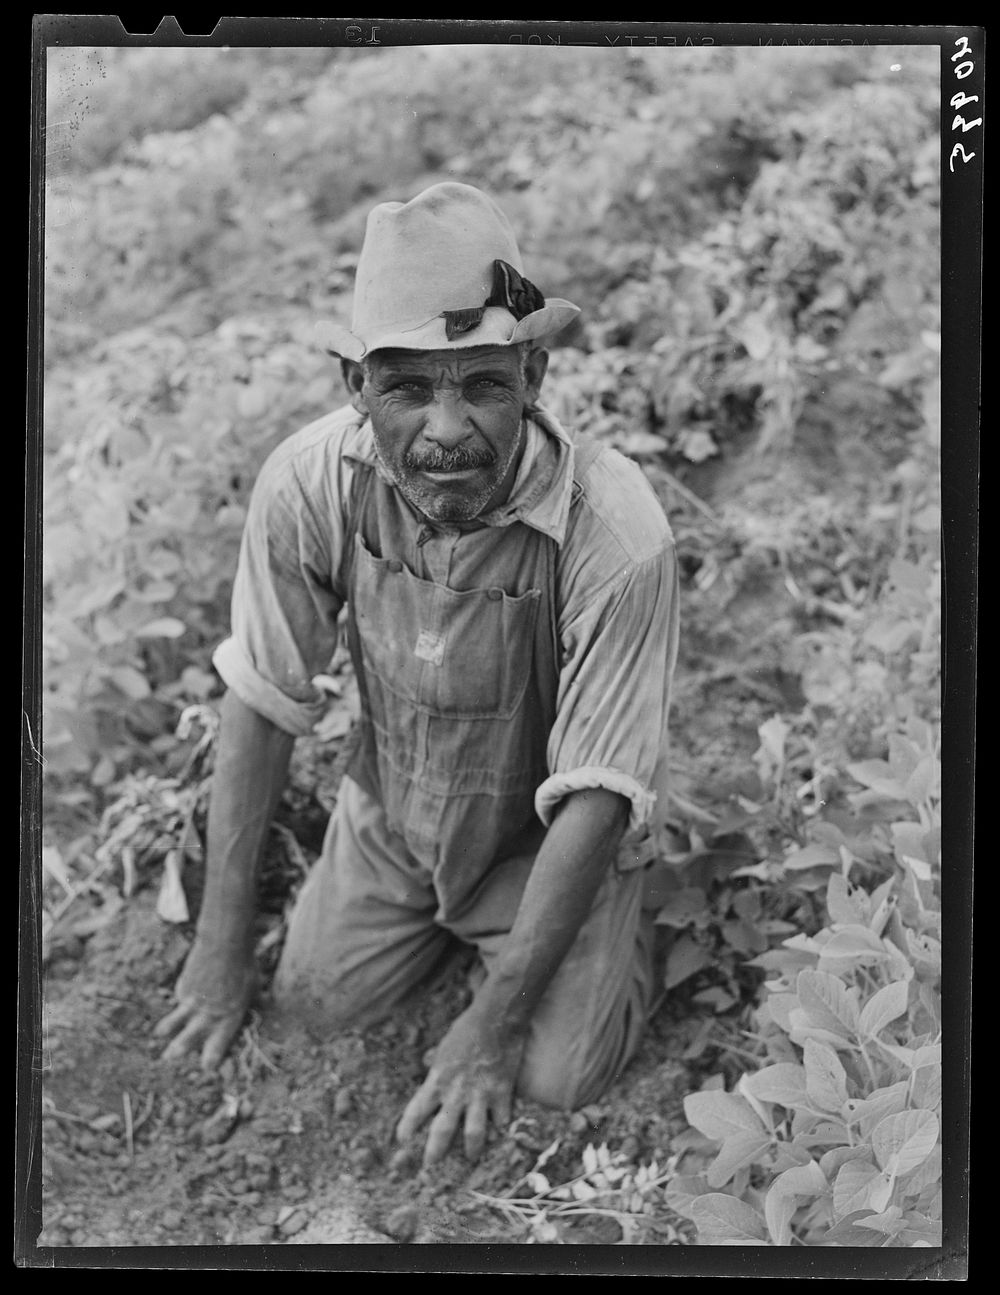 Migratory potato picker from Florida at work in the fields of T.C. Sawyer of Belcross, North Carolina. Sourced from the…